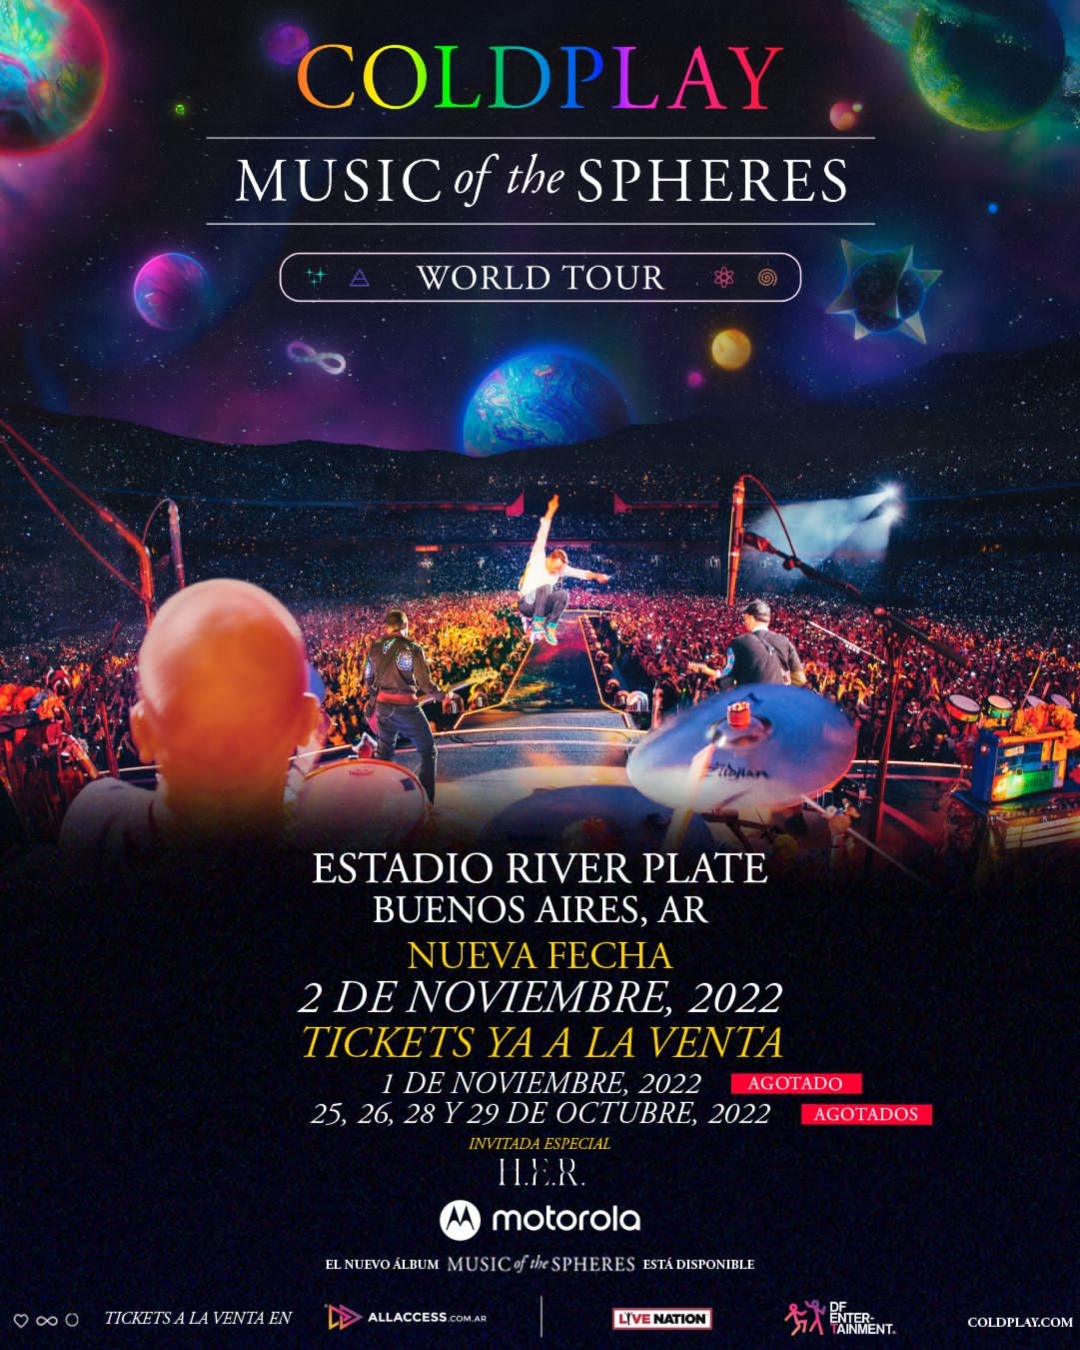 Coldplay dates in Argentina